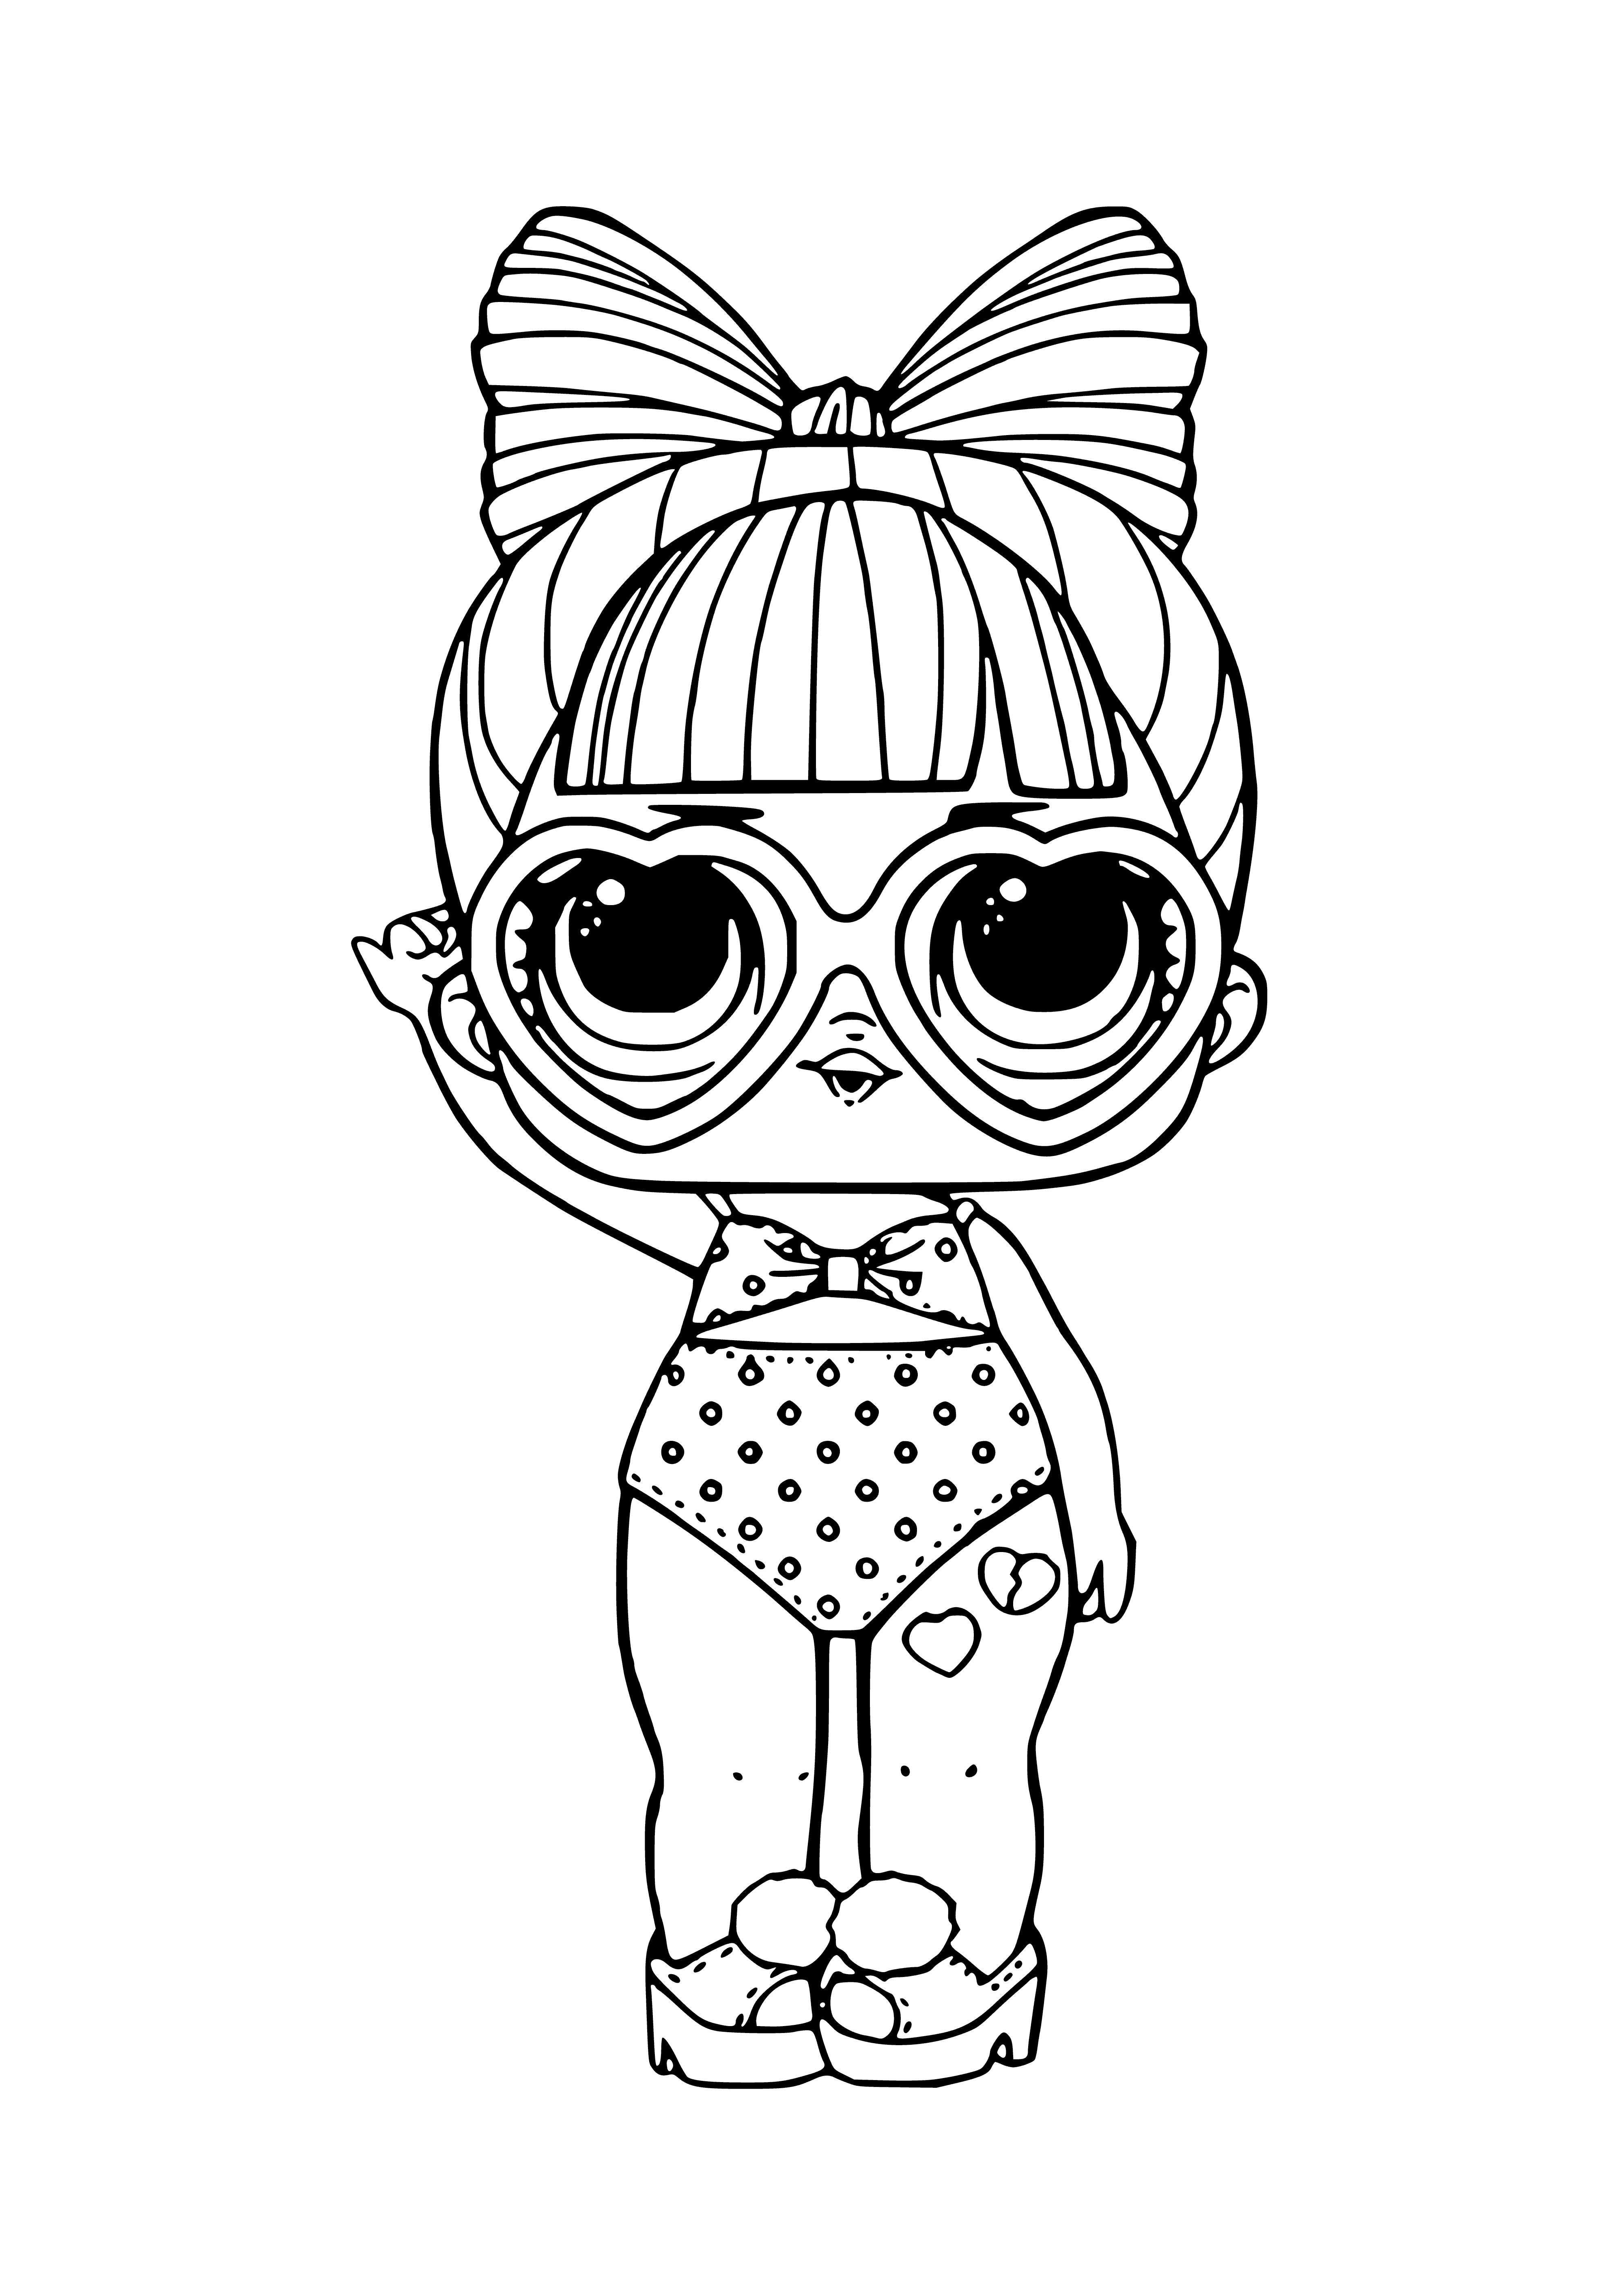 coloring page: Toy from L.O.L line filled with pink, purple and blue confetti. Label says "Insert tube and place, push down to release confetti".